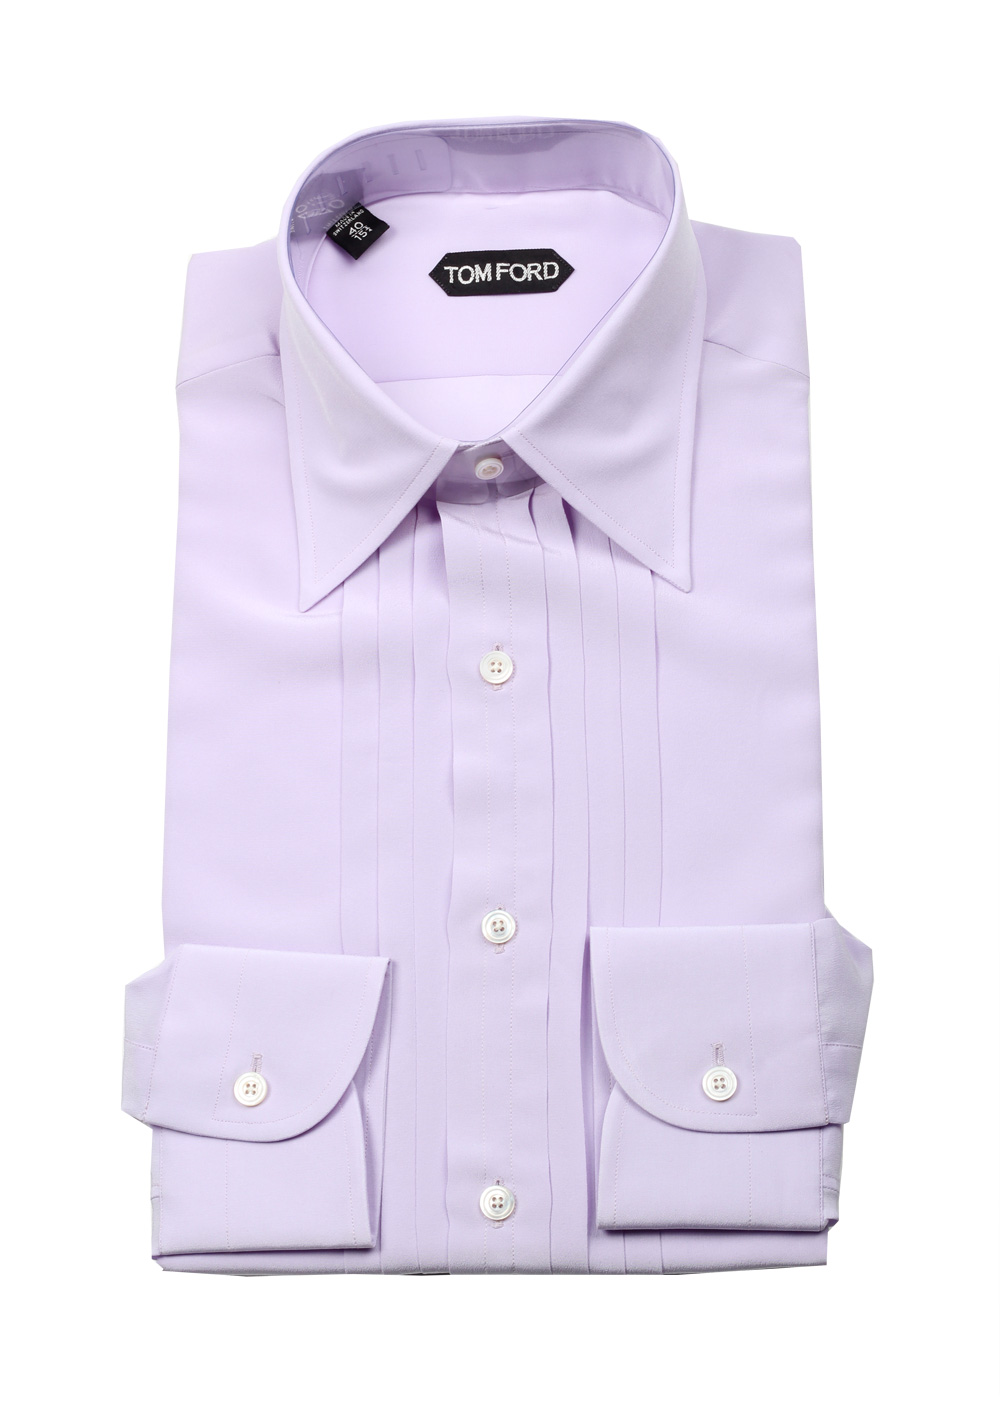 TOM FORD Solid Lilac Tuxedo Shirt Size 40 / 15,75 U.S. | Costume Limité